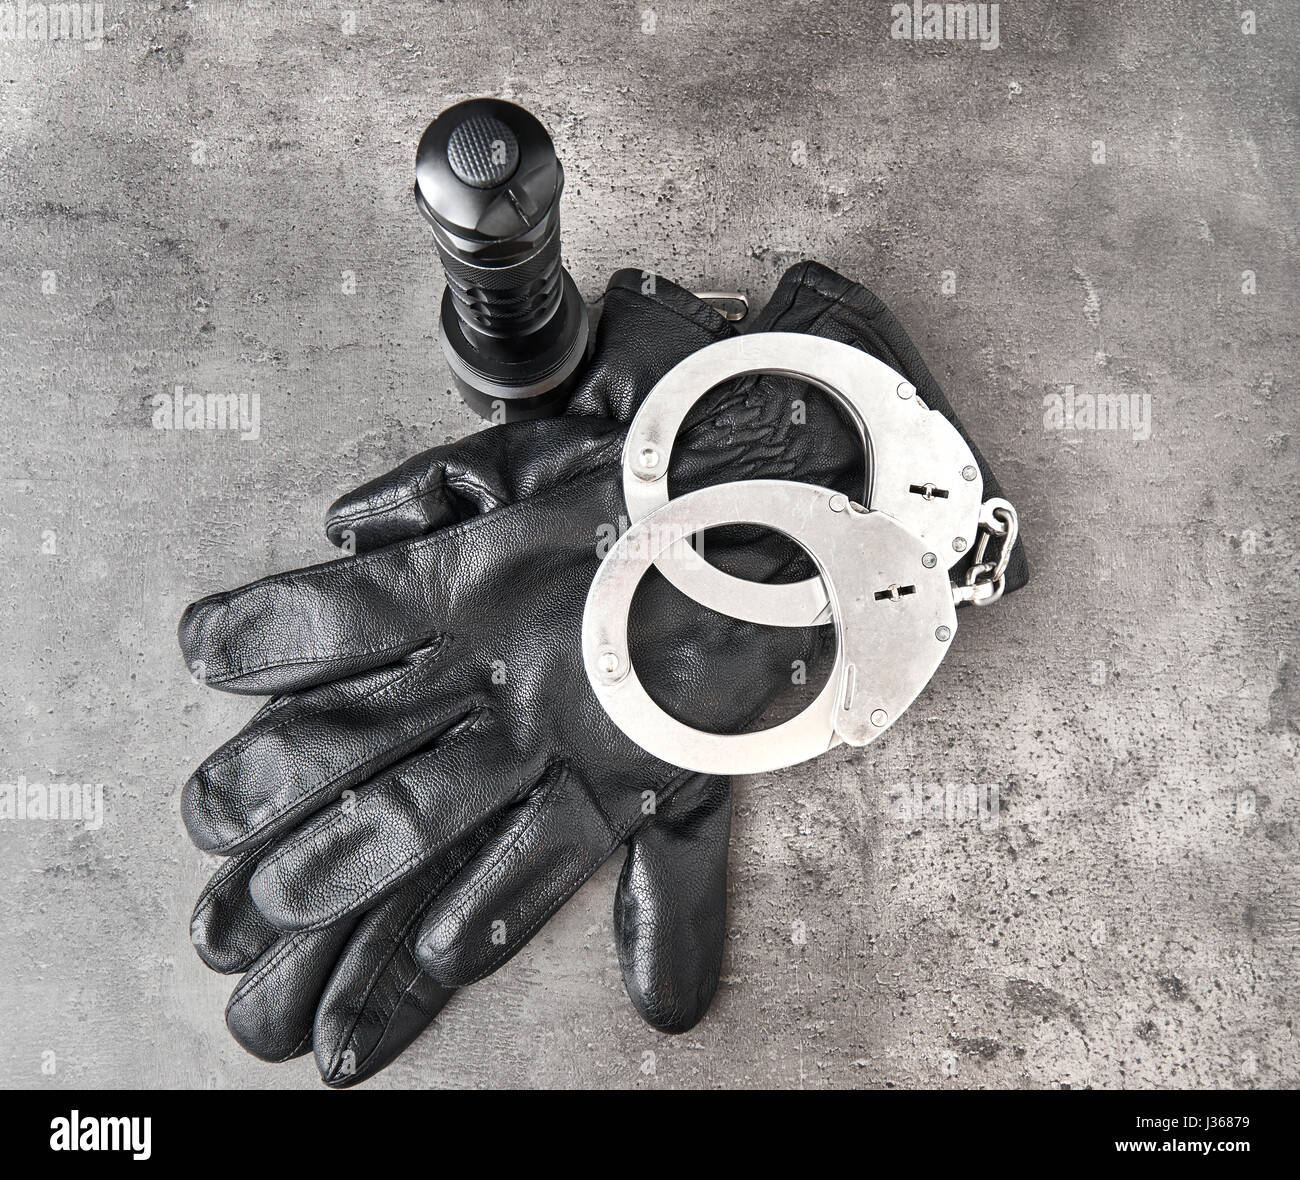 German police handcuffs, leather gloves and a torchlight on rough grey background with copy space. Top down View. Stock Photo